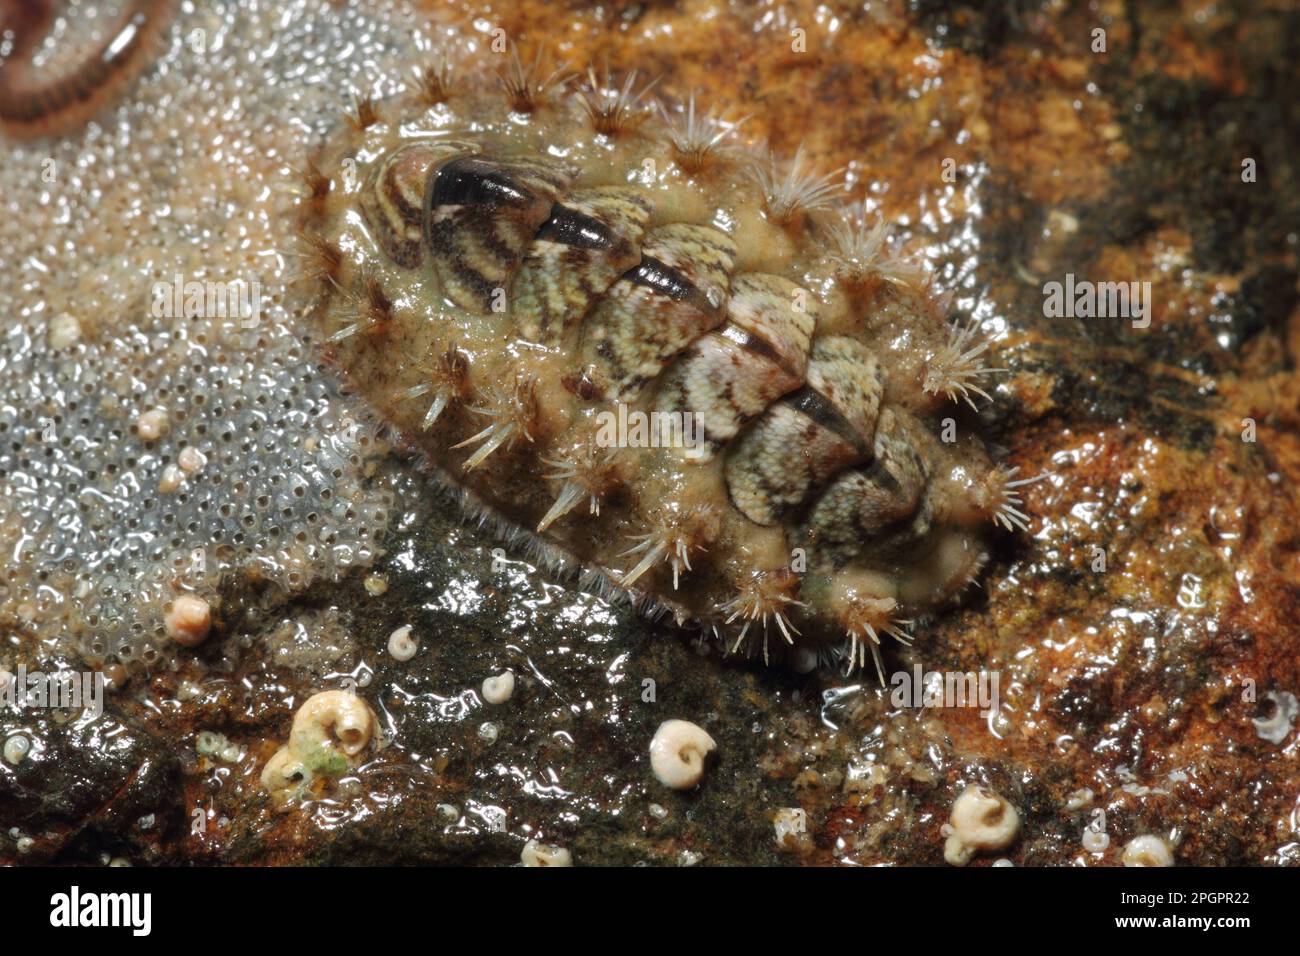 Beetle snail, Beetle snails, Other animals, Marine snails, Snails, Animals, Molluscs, Bristled Chiton (Acanthochitona fascicularis) adult, in Stock Photo